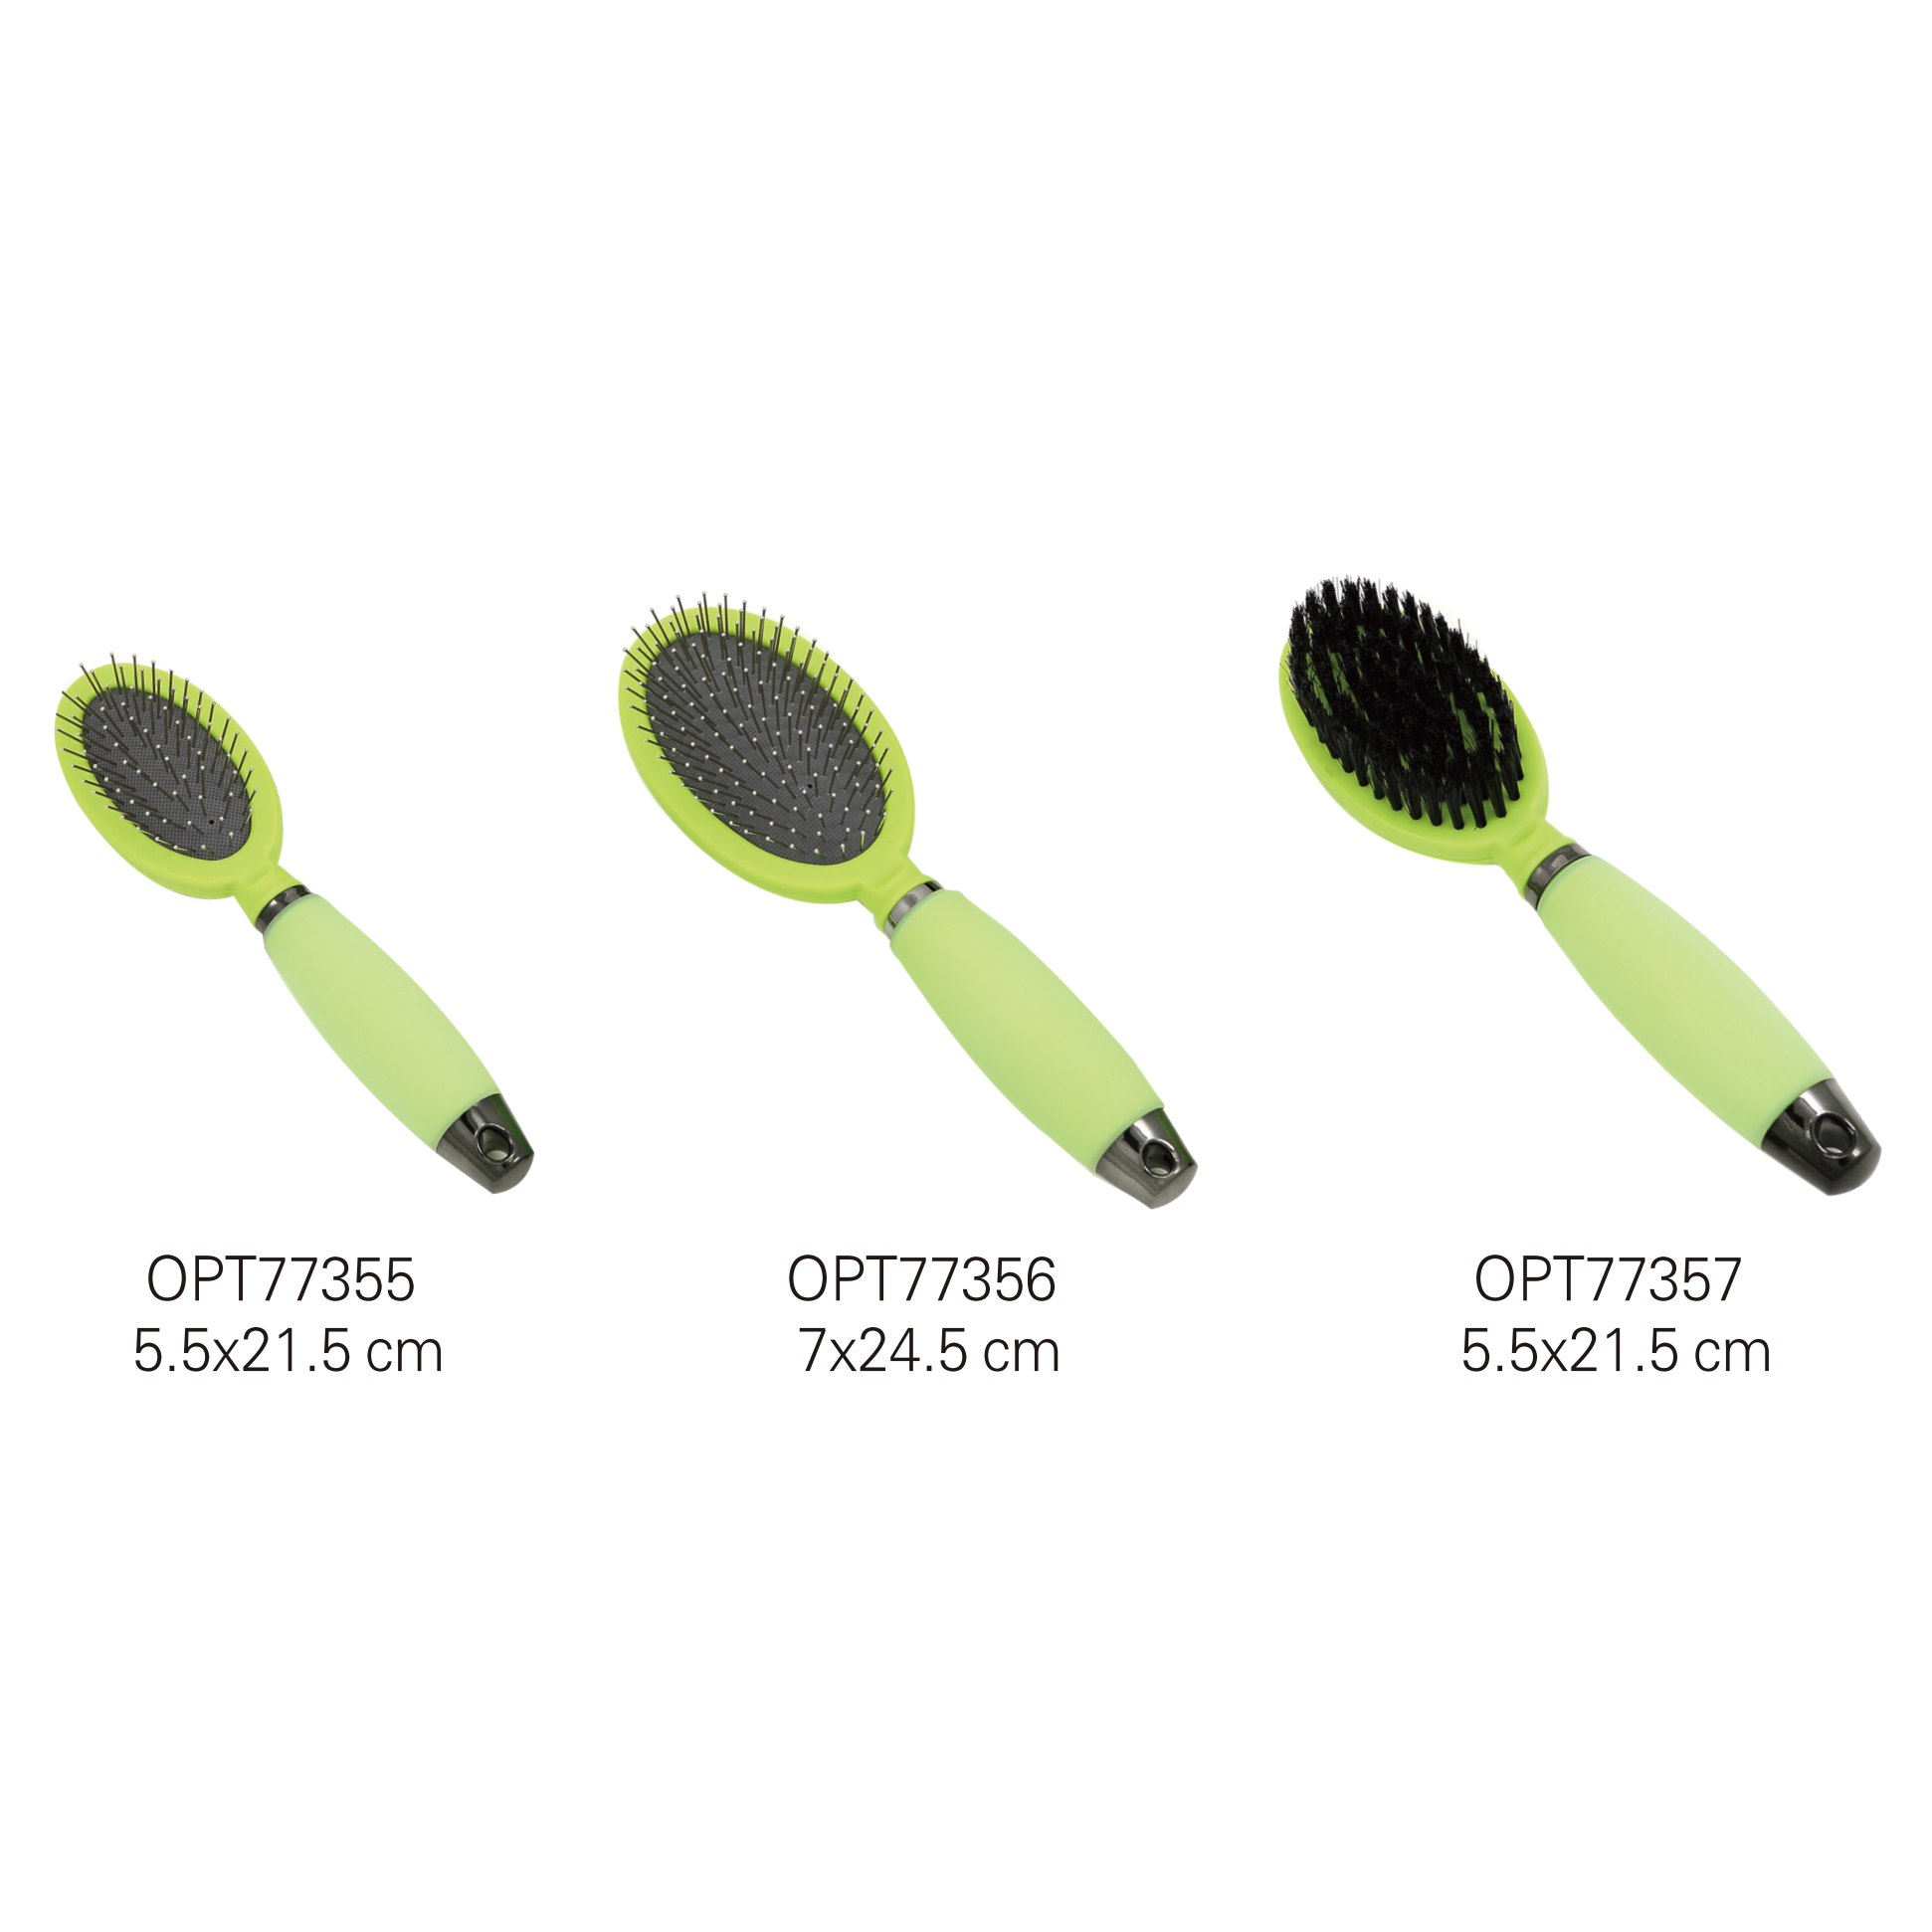 OPT77355-OPT77357 Grooming tools combs & brushes